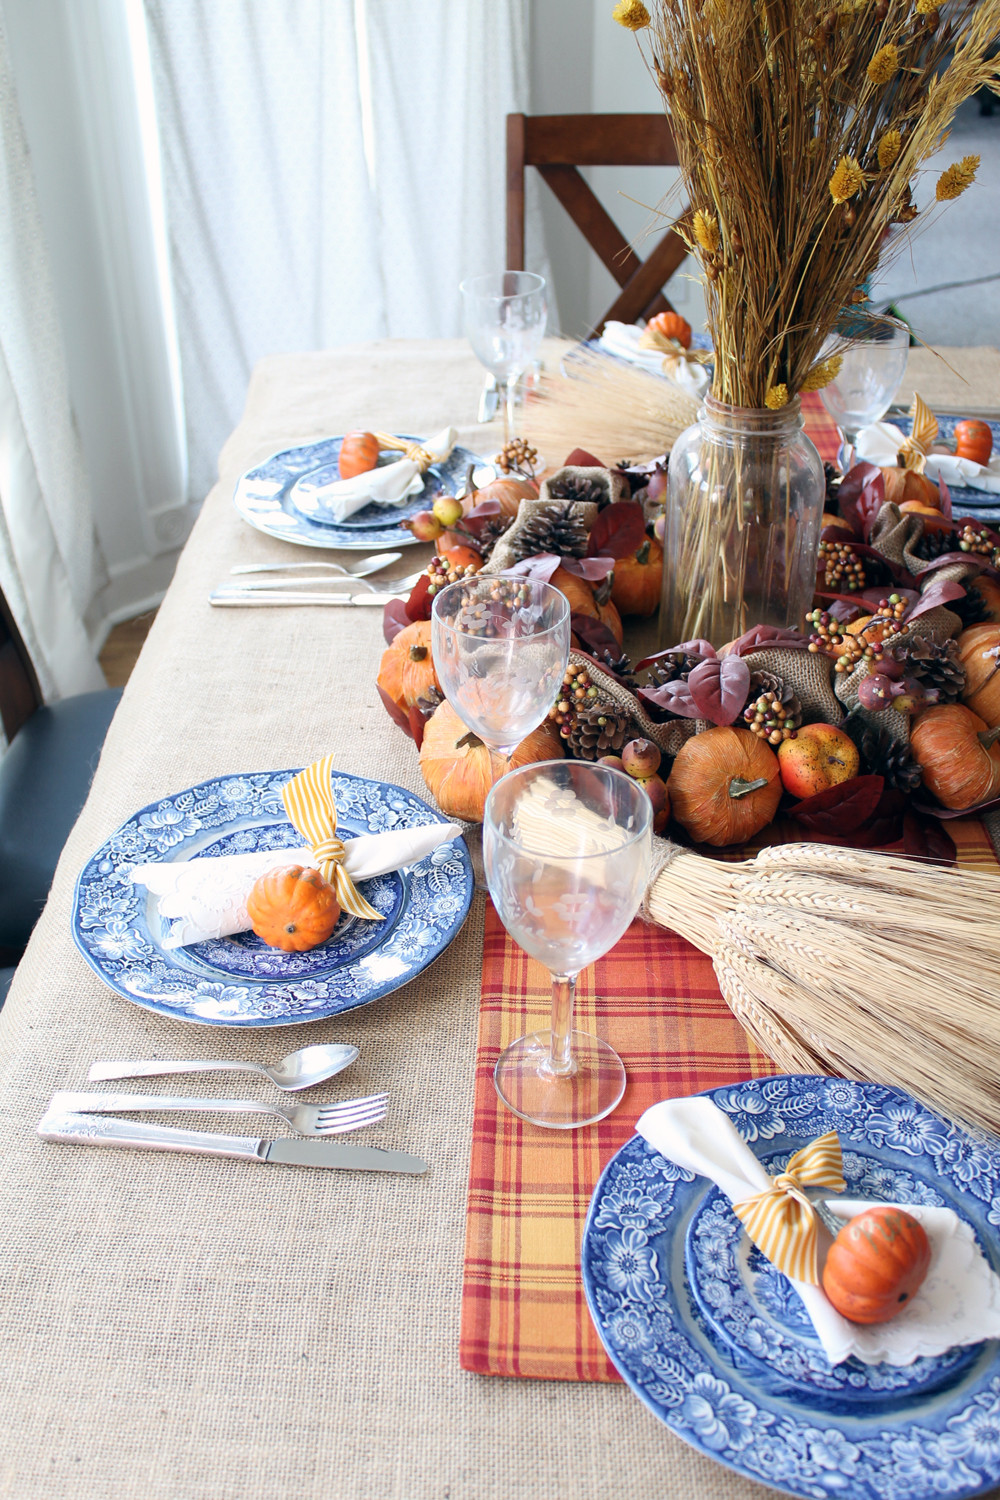 DIY Thanksgiving Decor Pinterest
 Thanksgiving Decorating Ideas for Your Holiday Table The